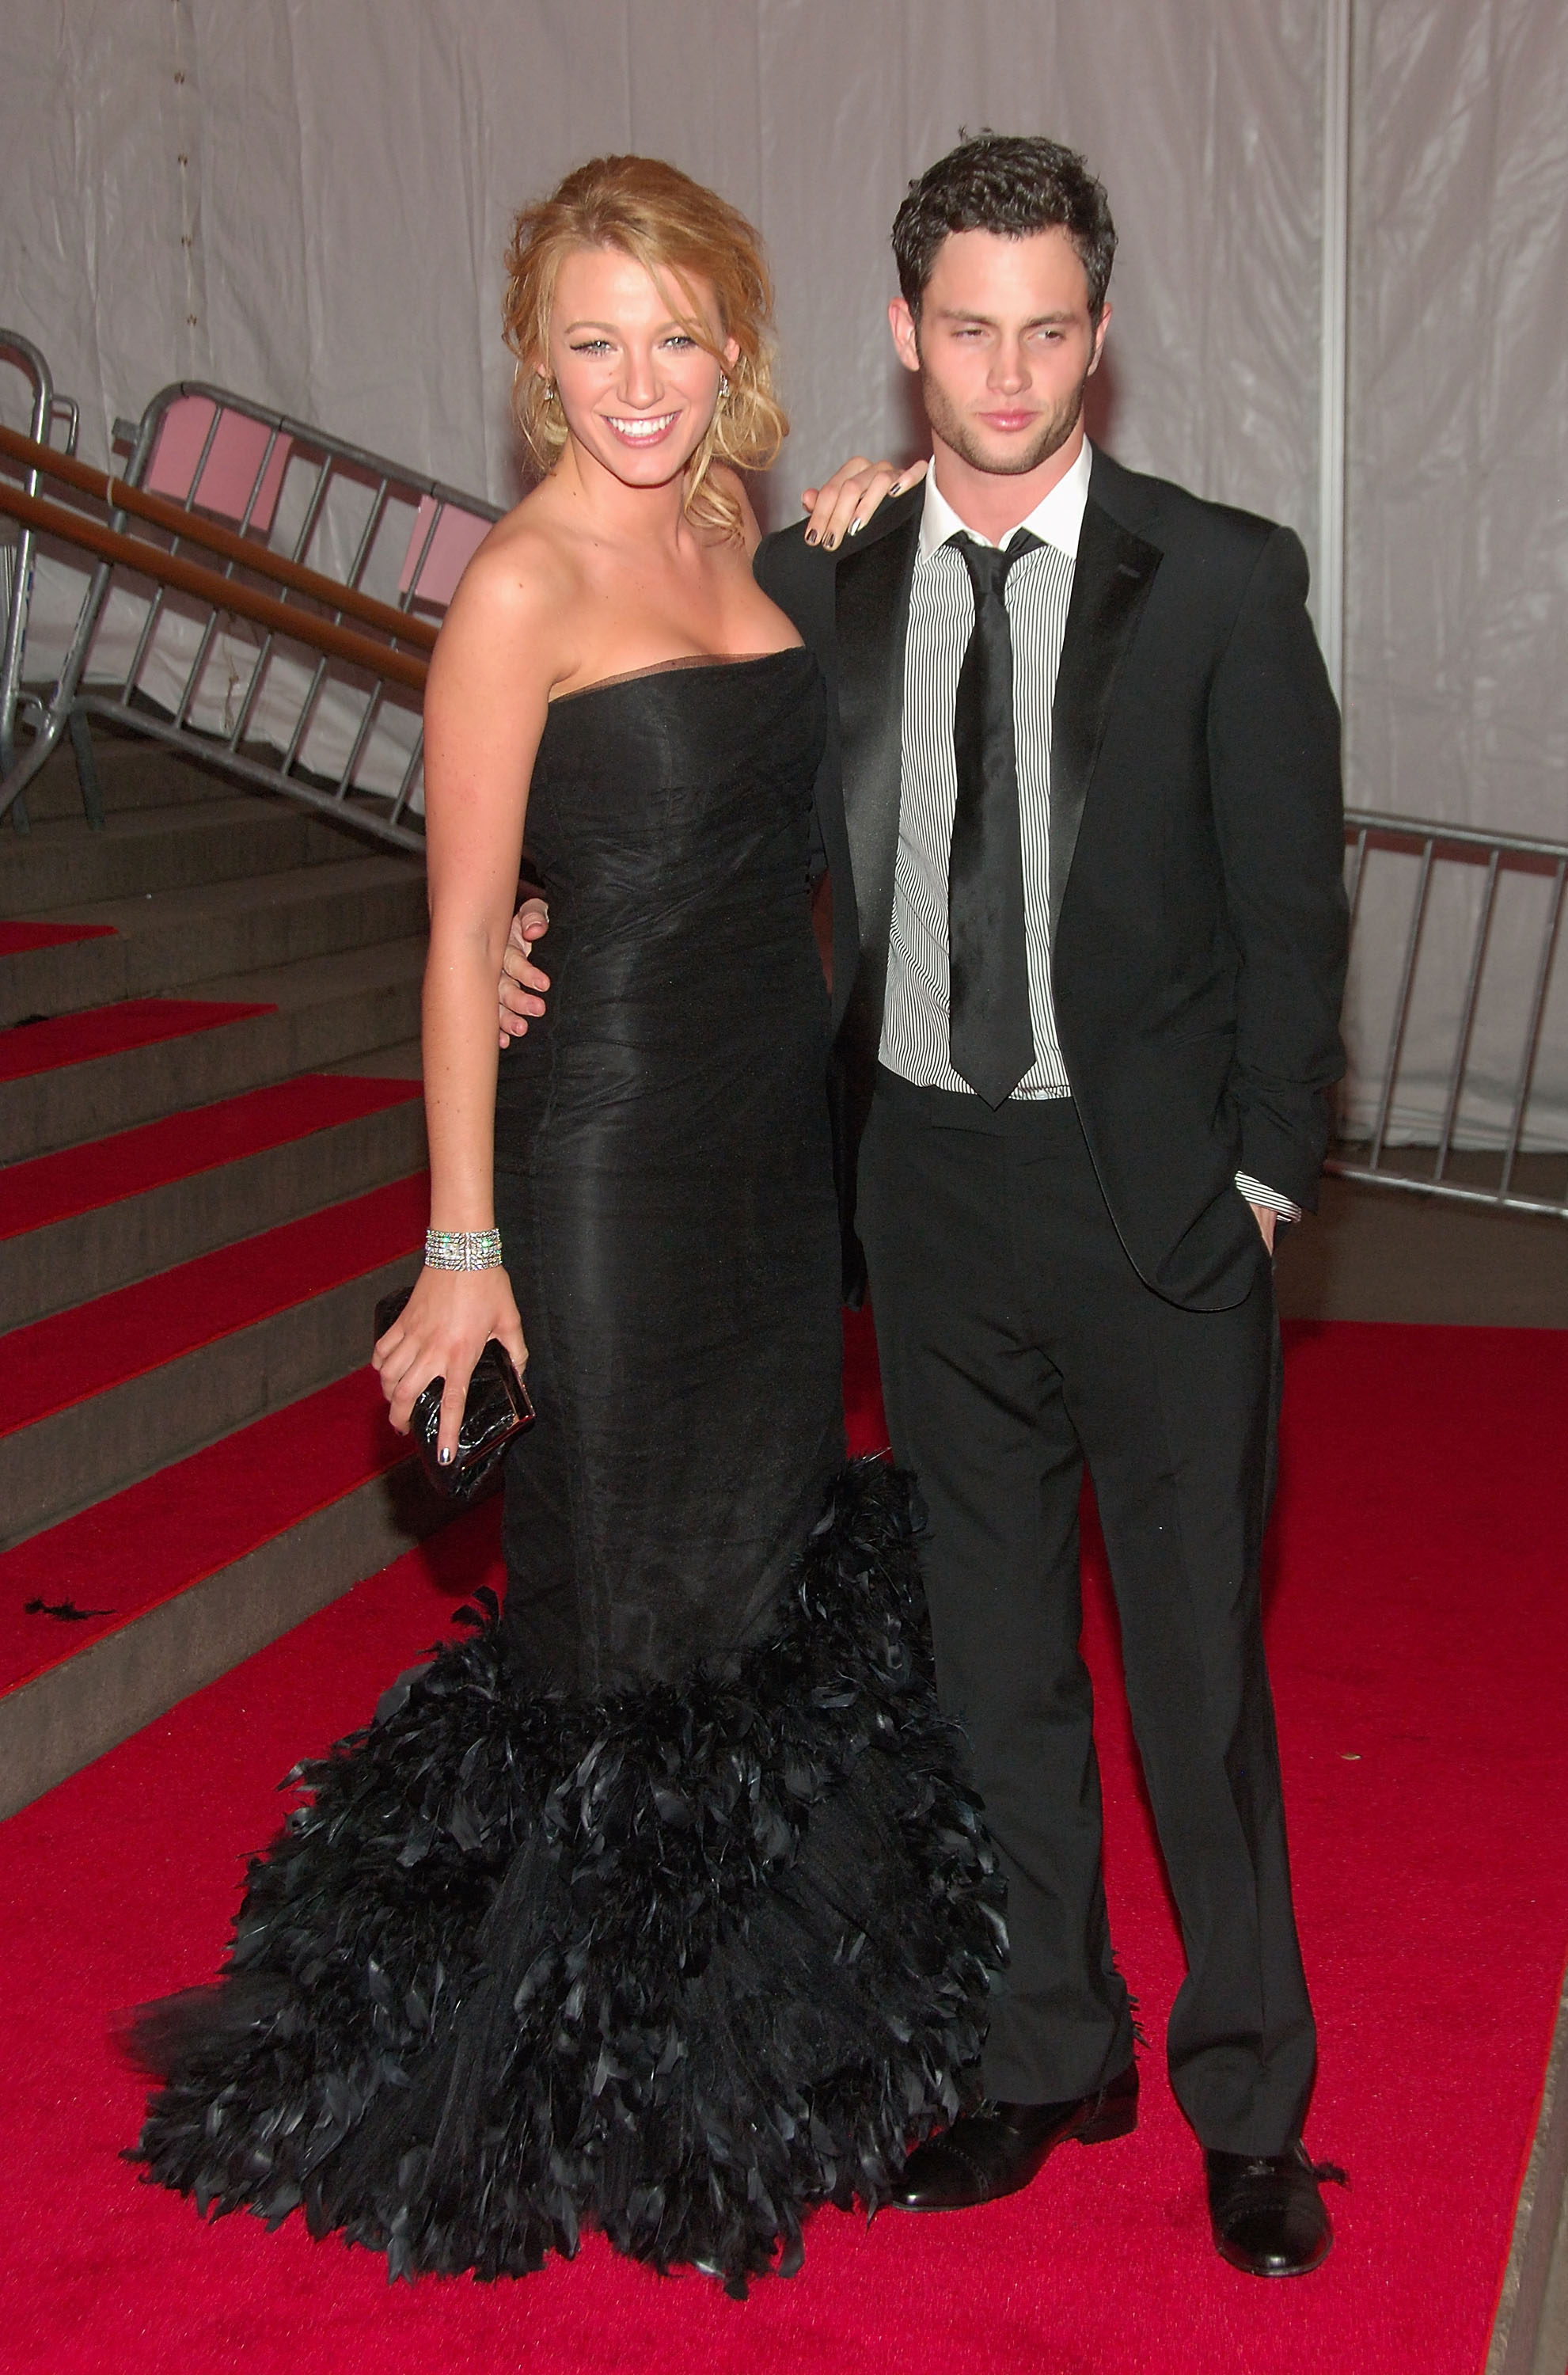 Two celebrities on red carpet; one in a black strapless gown with feather details, the other in a classic black suit